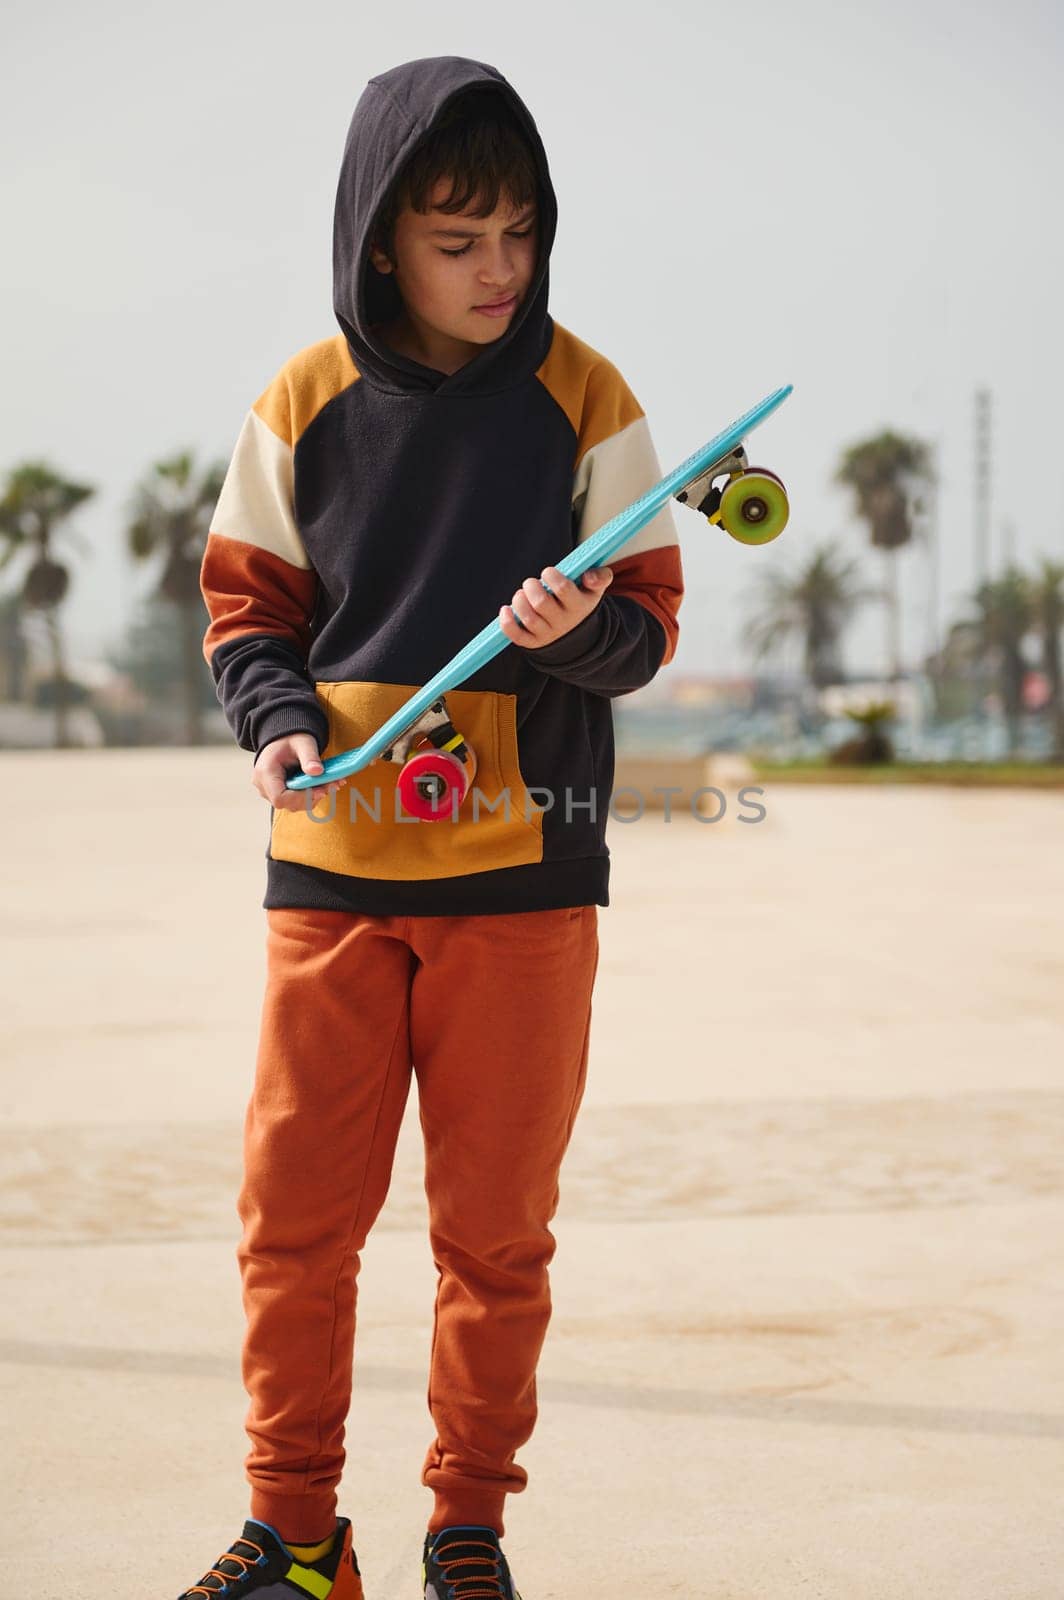 Caucasian teenage boy dressed in stylish sportswear, holding skateboard and looking down, standing at outdoor skatepark by artgf